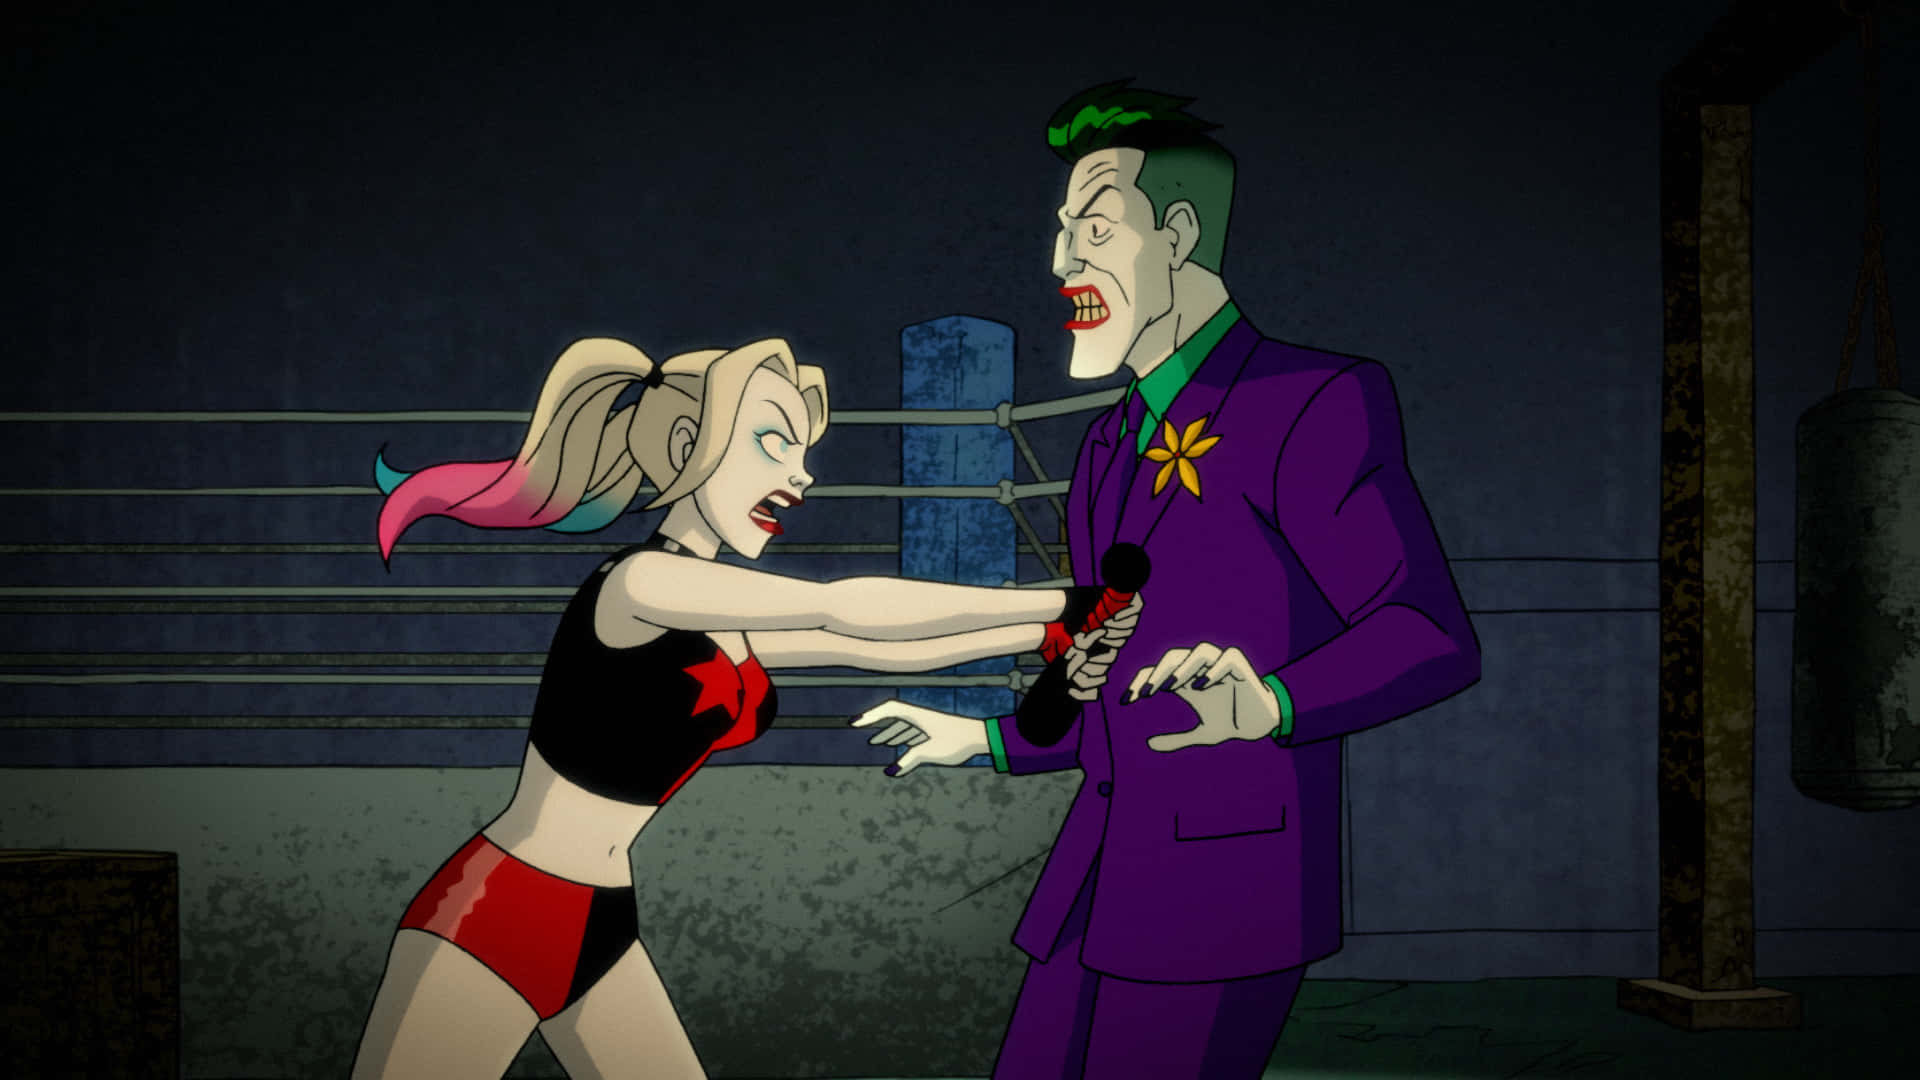 The Mad Lovers - Harley Quinn and Joker in a Classic Cartoon Style Wallpaper